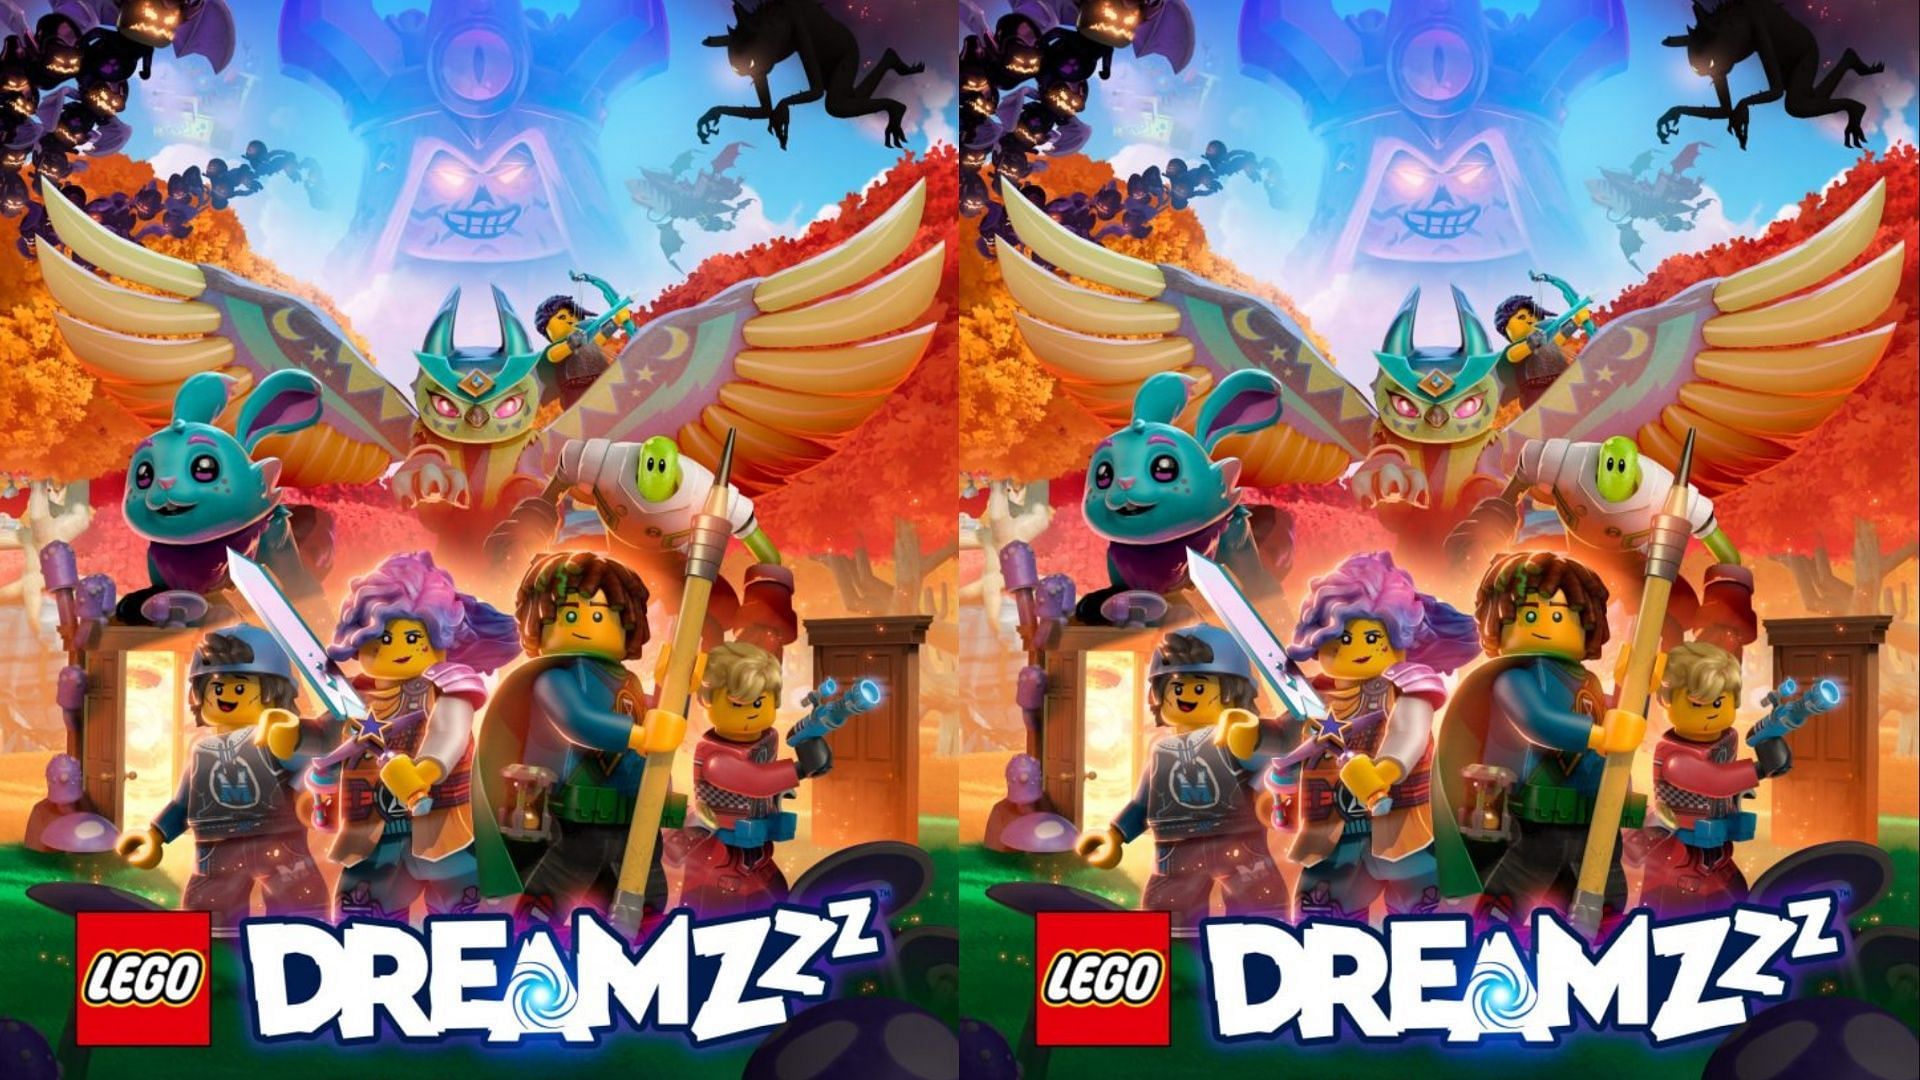 the new DreamZzz sets will be available on the brand&#039;s website along with major retailers across the U.S., U.K., and Canada (Image via LEGO)